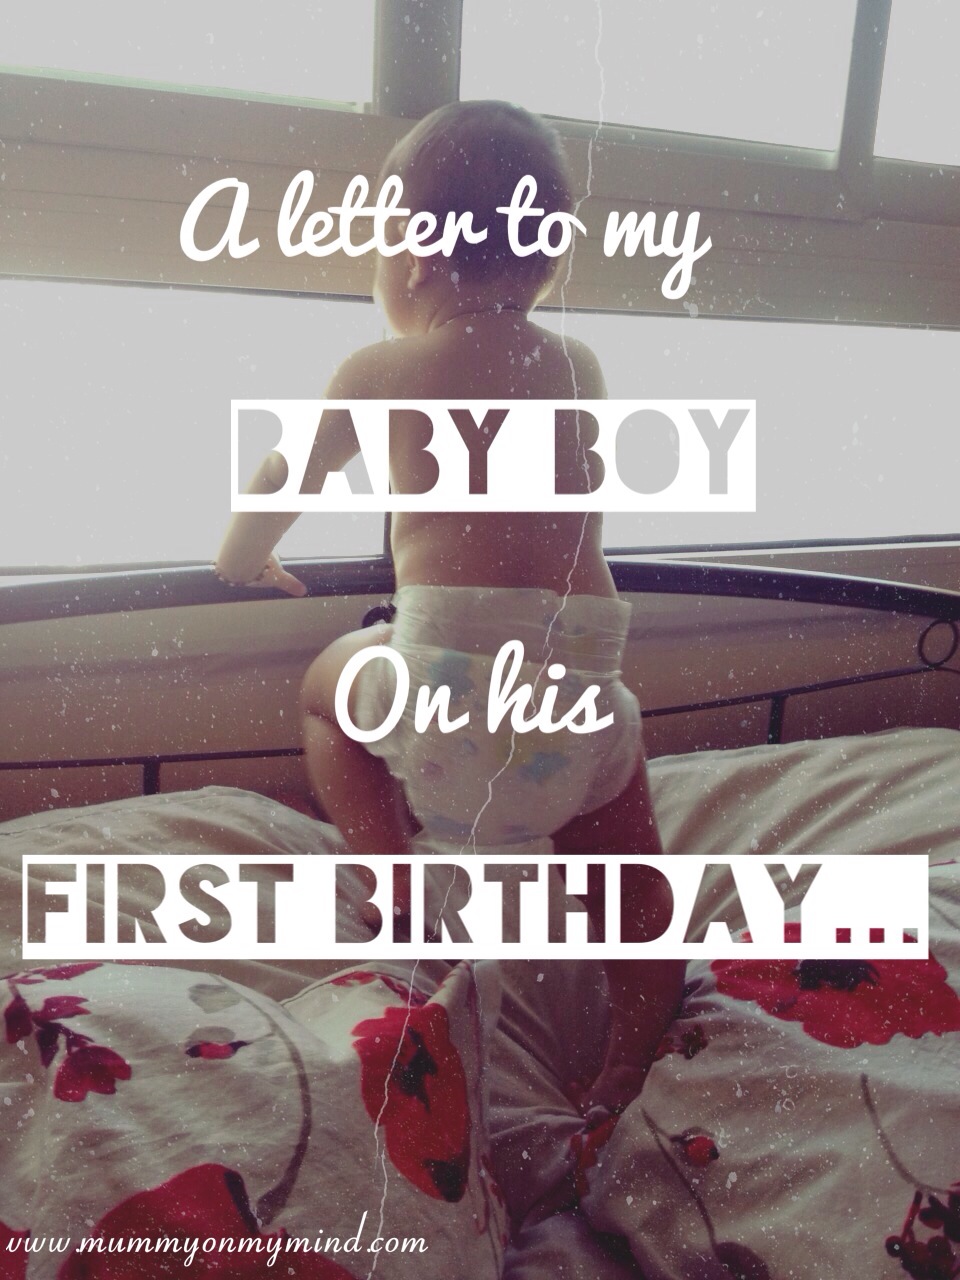 A letter to my Baby Boy on his First Birthday…